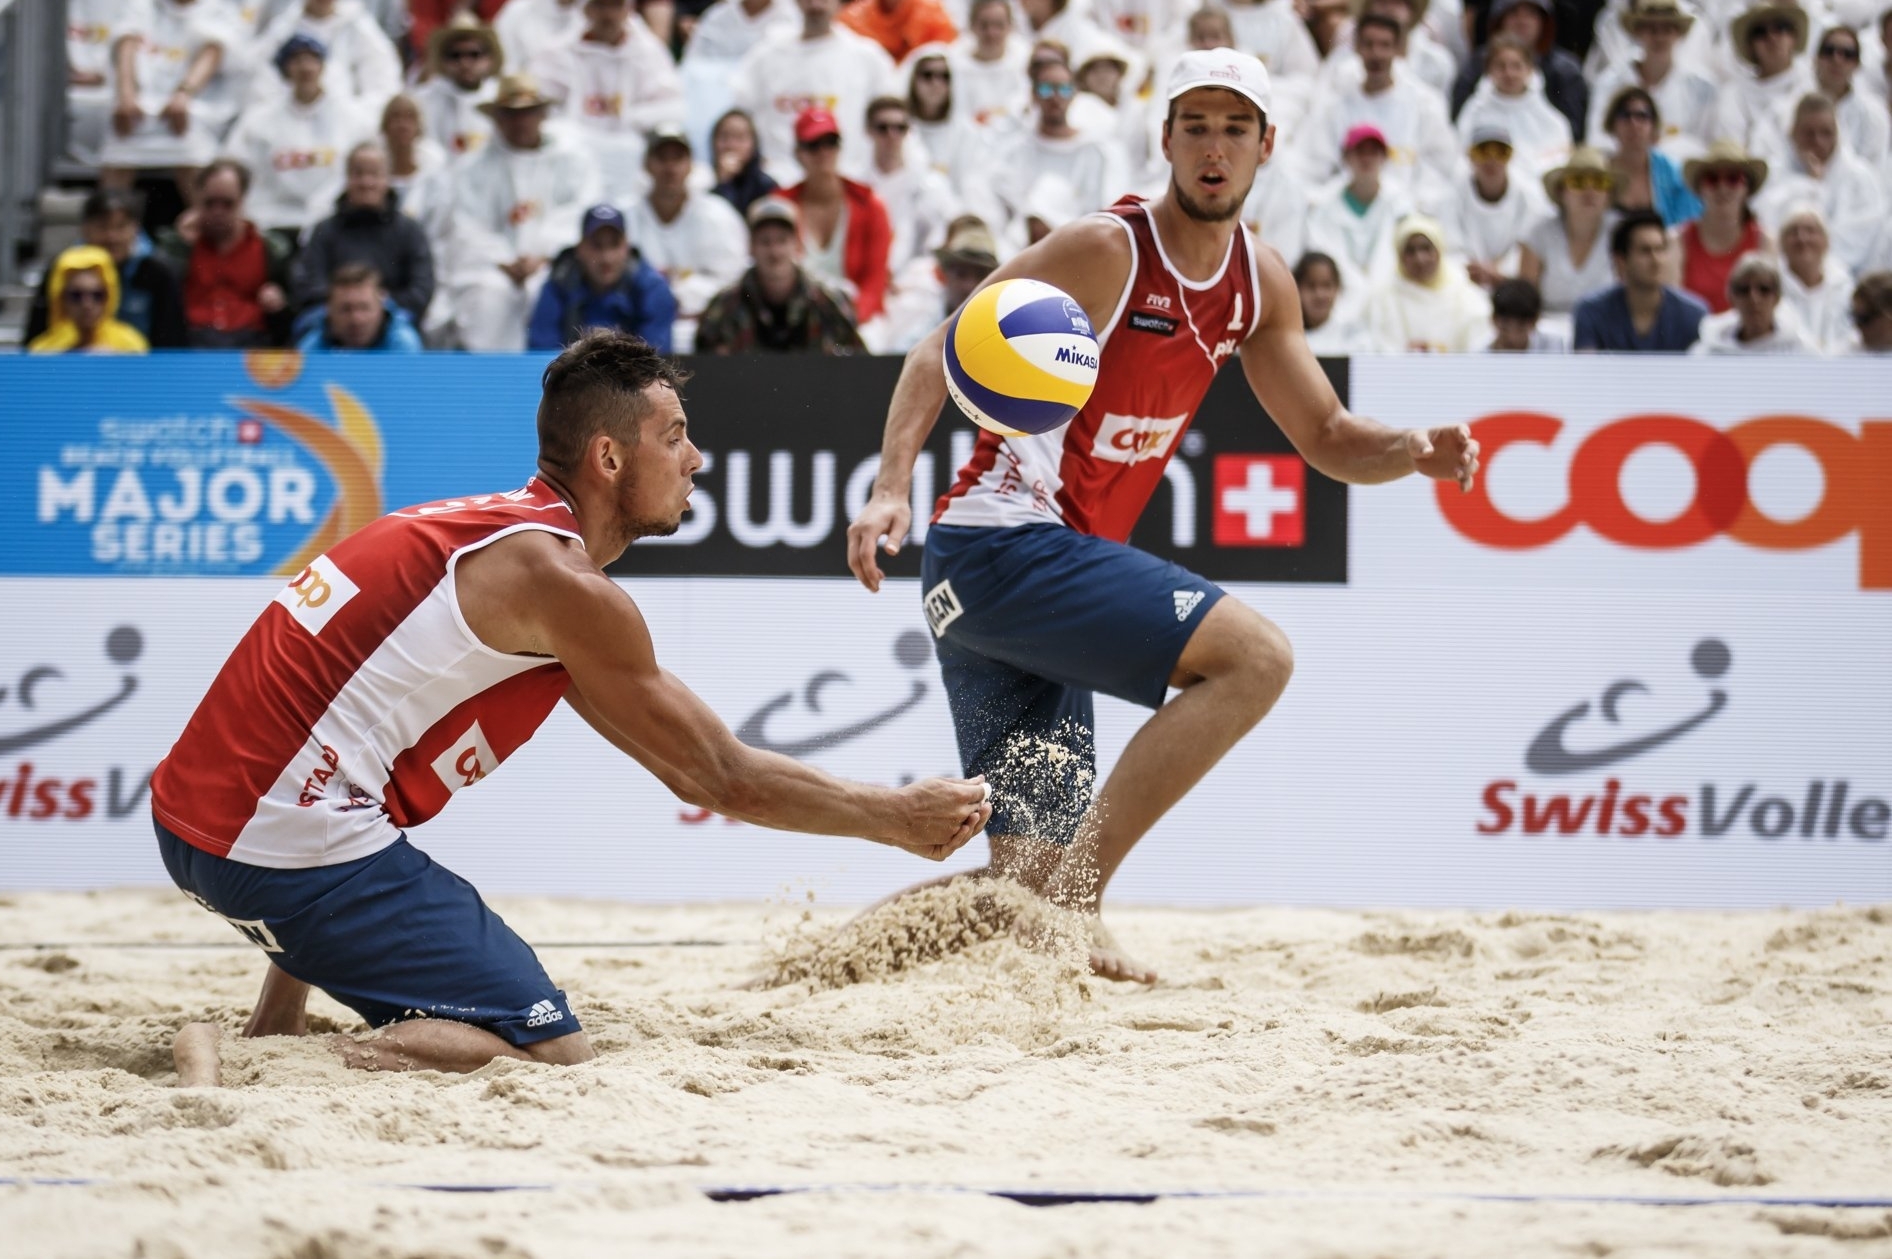 Kantor/Losiak won silver at the Gstaad Major in July